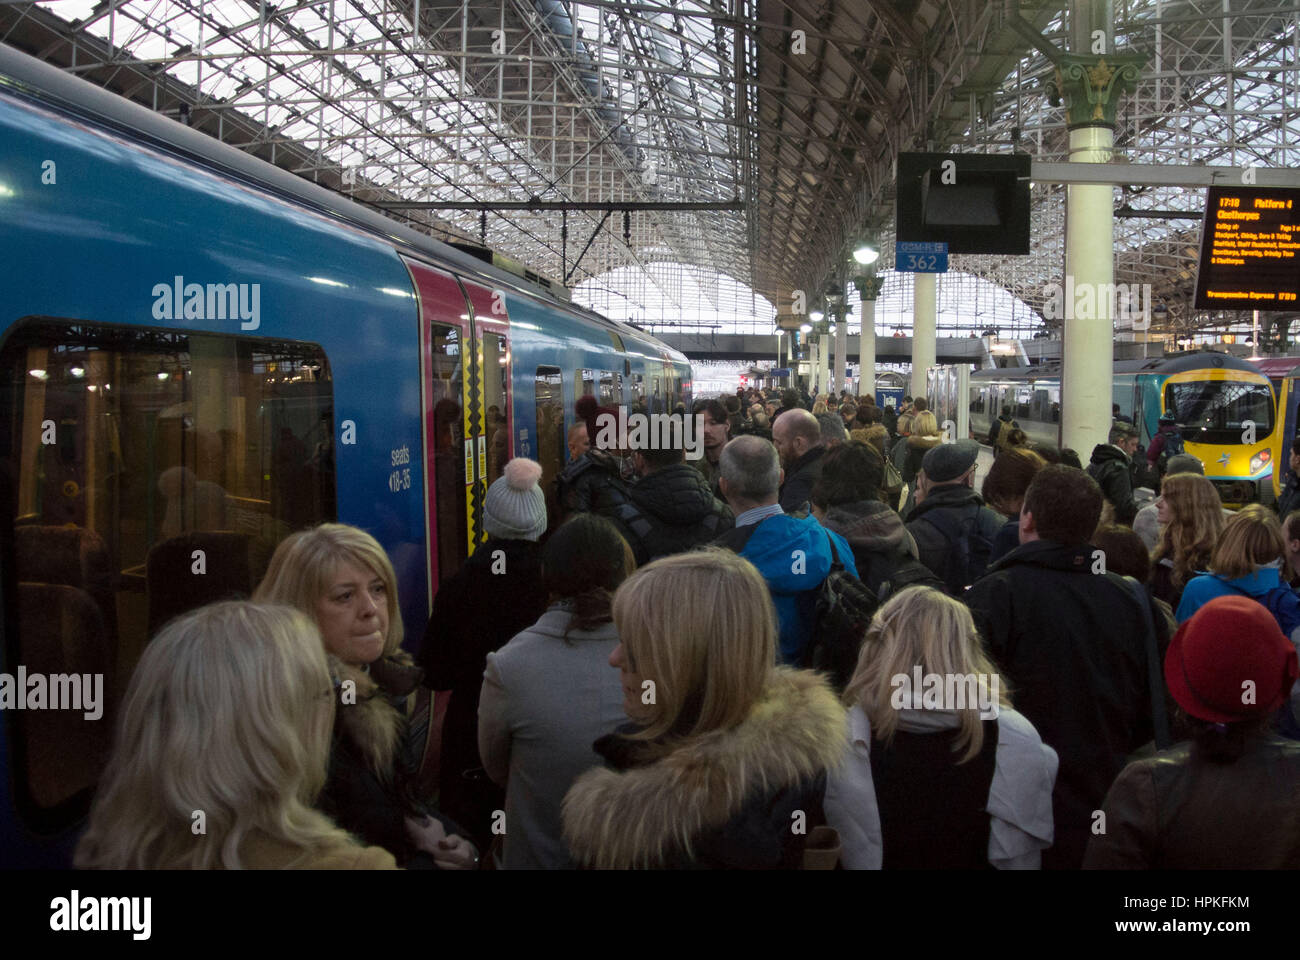 Manchester, UK. 23rd Feb, 2017. Storm Doris ‘Weather bomb' causes severe delays on all trains from Manchester Piccadilly rail station. Commuters warned of cancelled and delayed services as 'all lines are blocked' following 'overhead wire problems'. Departure boards shows severely delayed services. Credit: Bailey-Cooper Photography/Alamy Live News Stock Photo